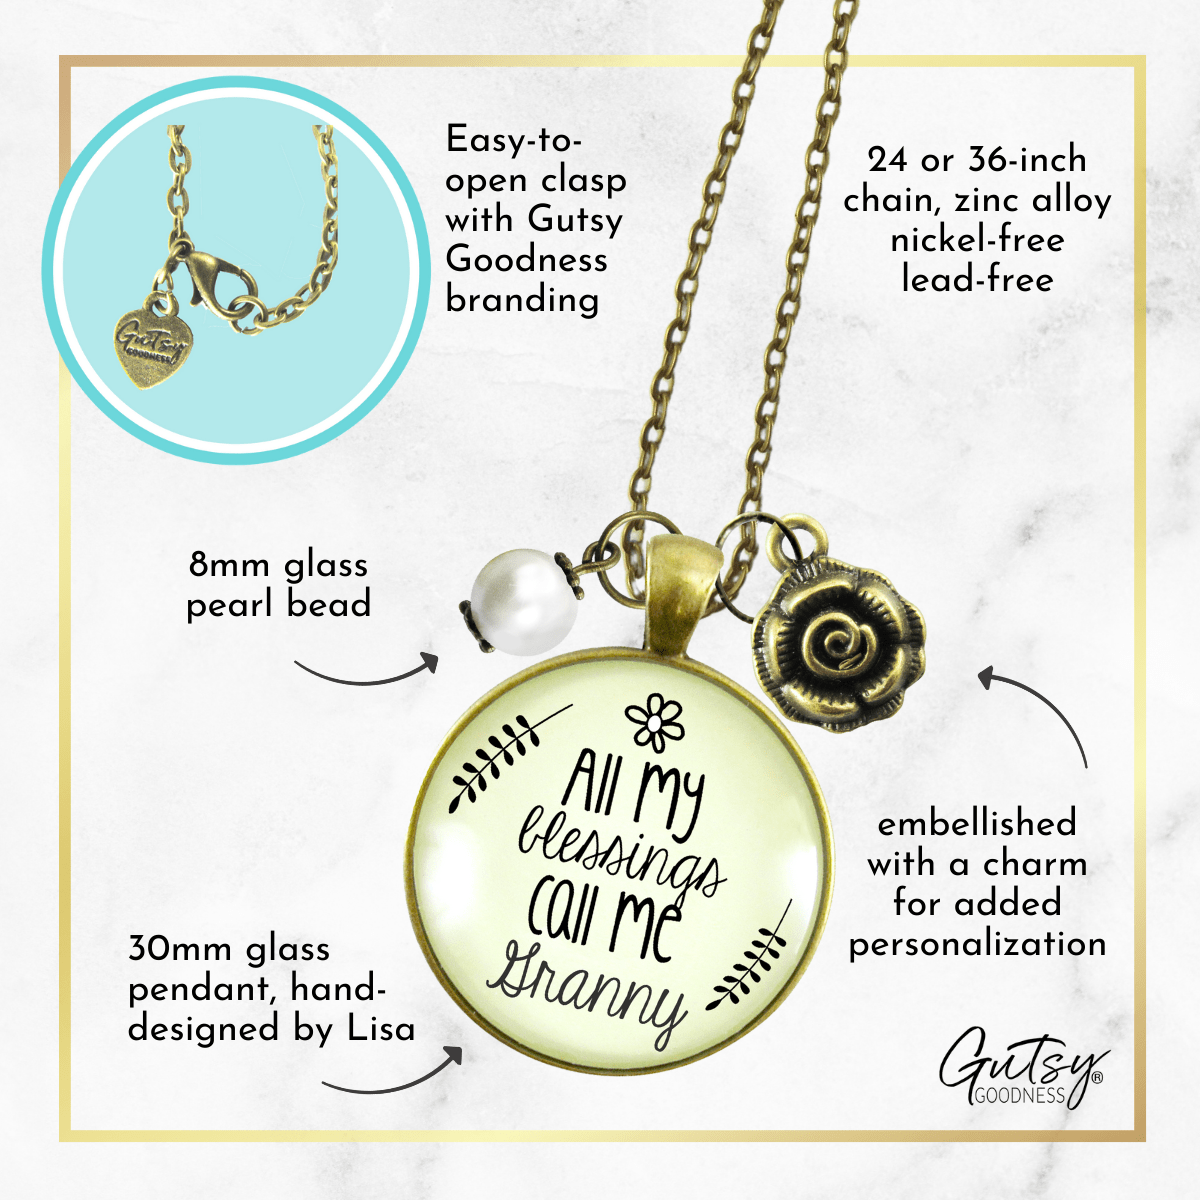 Gutsy Goodness Granny Necklace All My Blessings Grandma Rose Charm Gift Jewelry - Gutsy Goodness Handmade Jewelry;Granny Necklace All My Blessings Grandma Rose Charm Gift Jewelry - Gutsy Goodness Handmade Jewelry Gifts